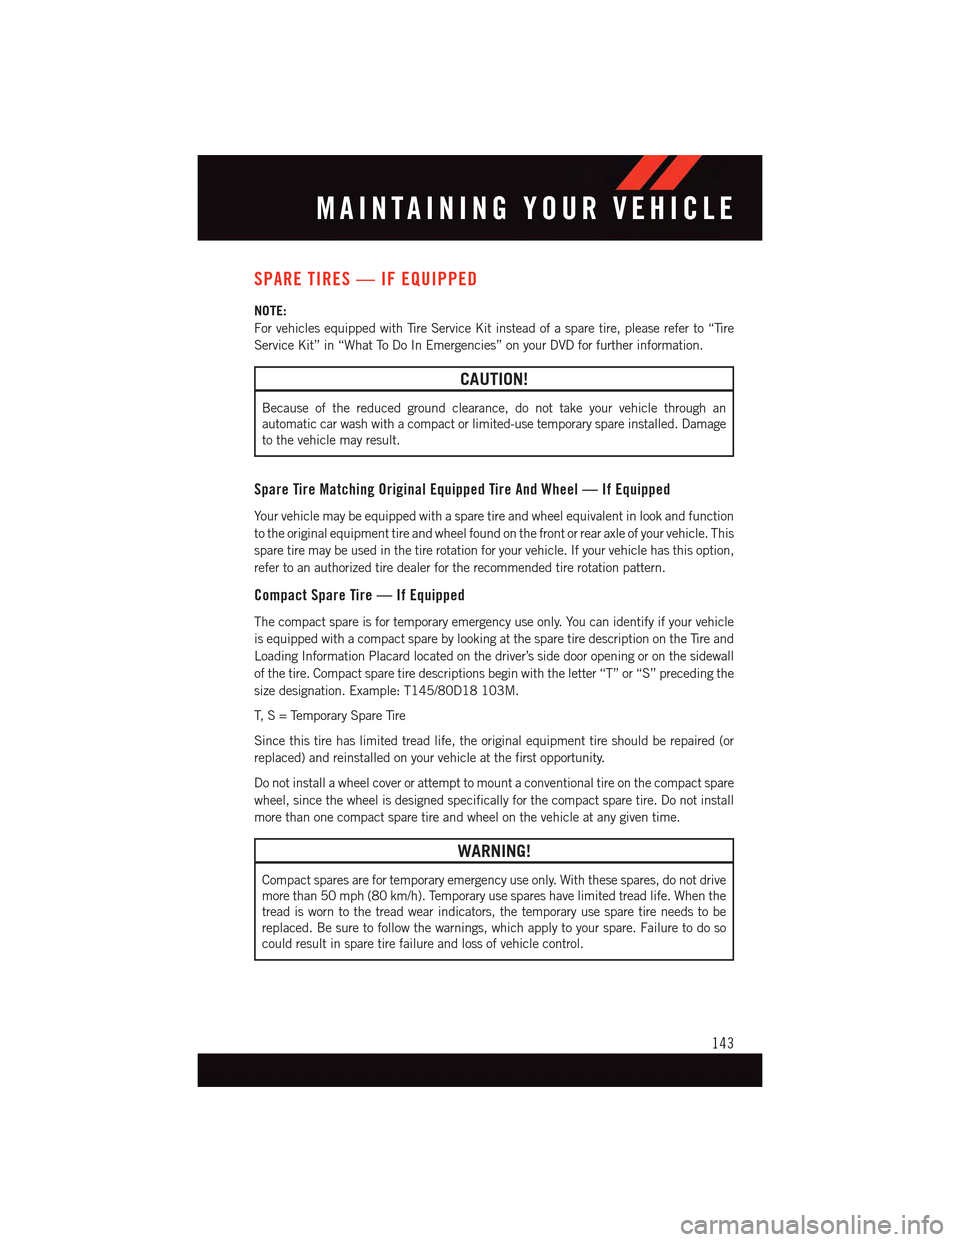 DODGE DART 2015 PF / 1.G User Guide SPARE TIRES — IF EQUIPPED
NOTE:
For vehicles equipped with Tire Service Kit instead of a spare tire, please refer to “Tire
Service Kit” in “What To Do In Emergencies” on your DVD for further